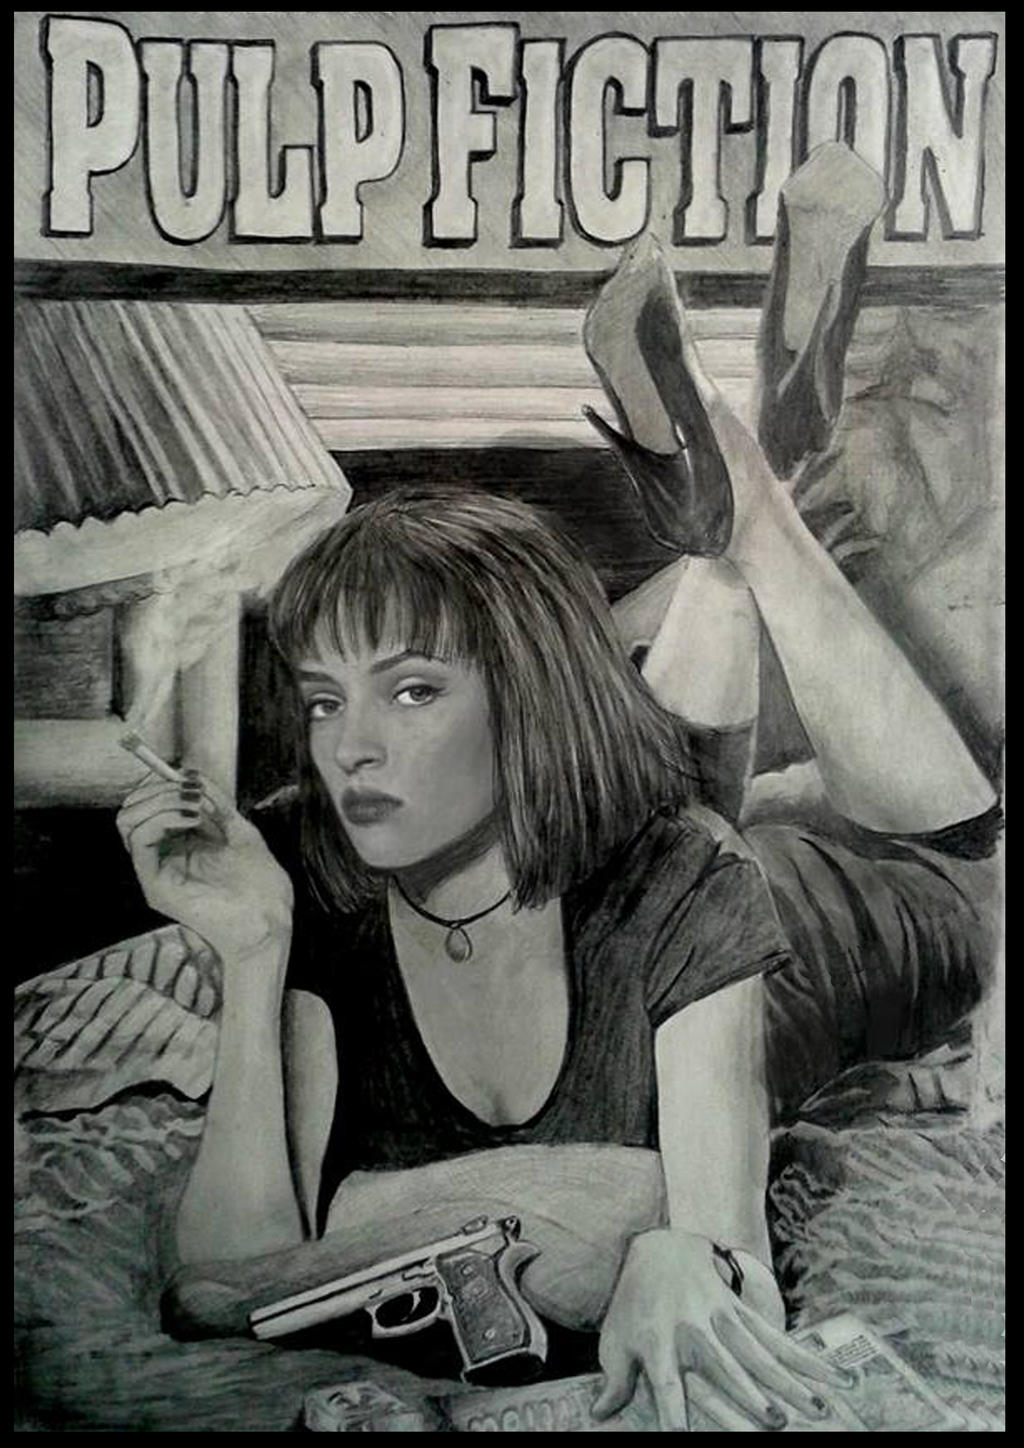 PULP FICTION poster drawing with pencil by jockerpk on DeviantArt